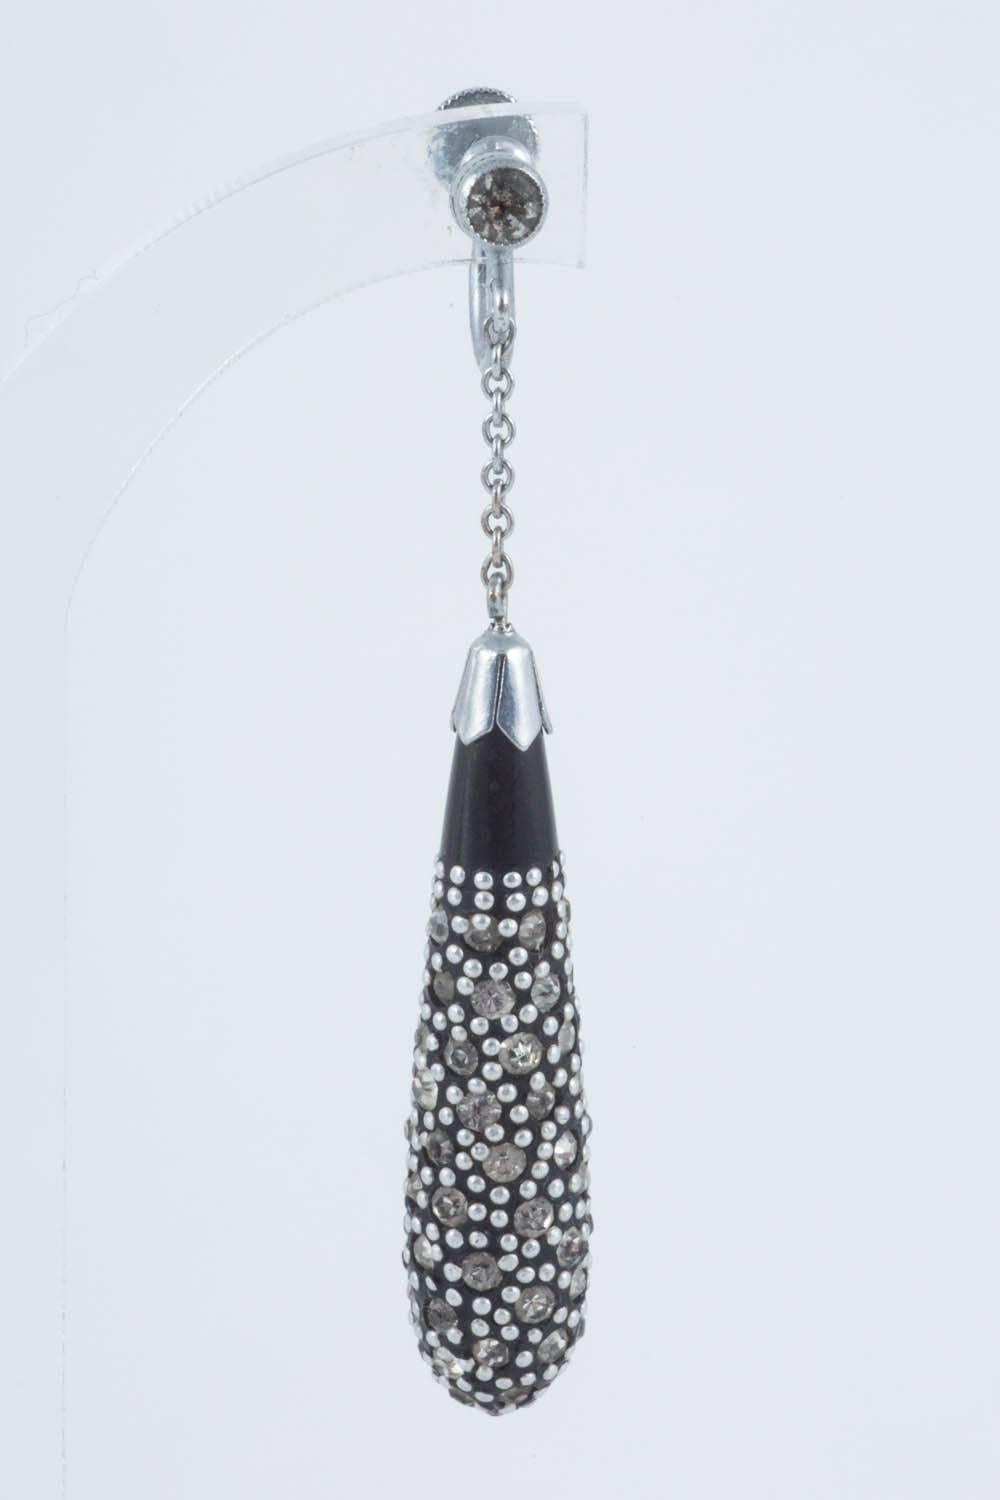 The elegant pendant earrings, are made from black Bakelite and studded with pastes, as well as small chrome ball/spots. They are set off  with a matching paste that sits on the ear. Made in France in the 1920s, they contain that Art Deco style and